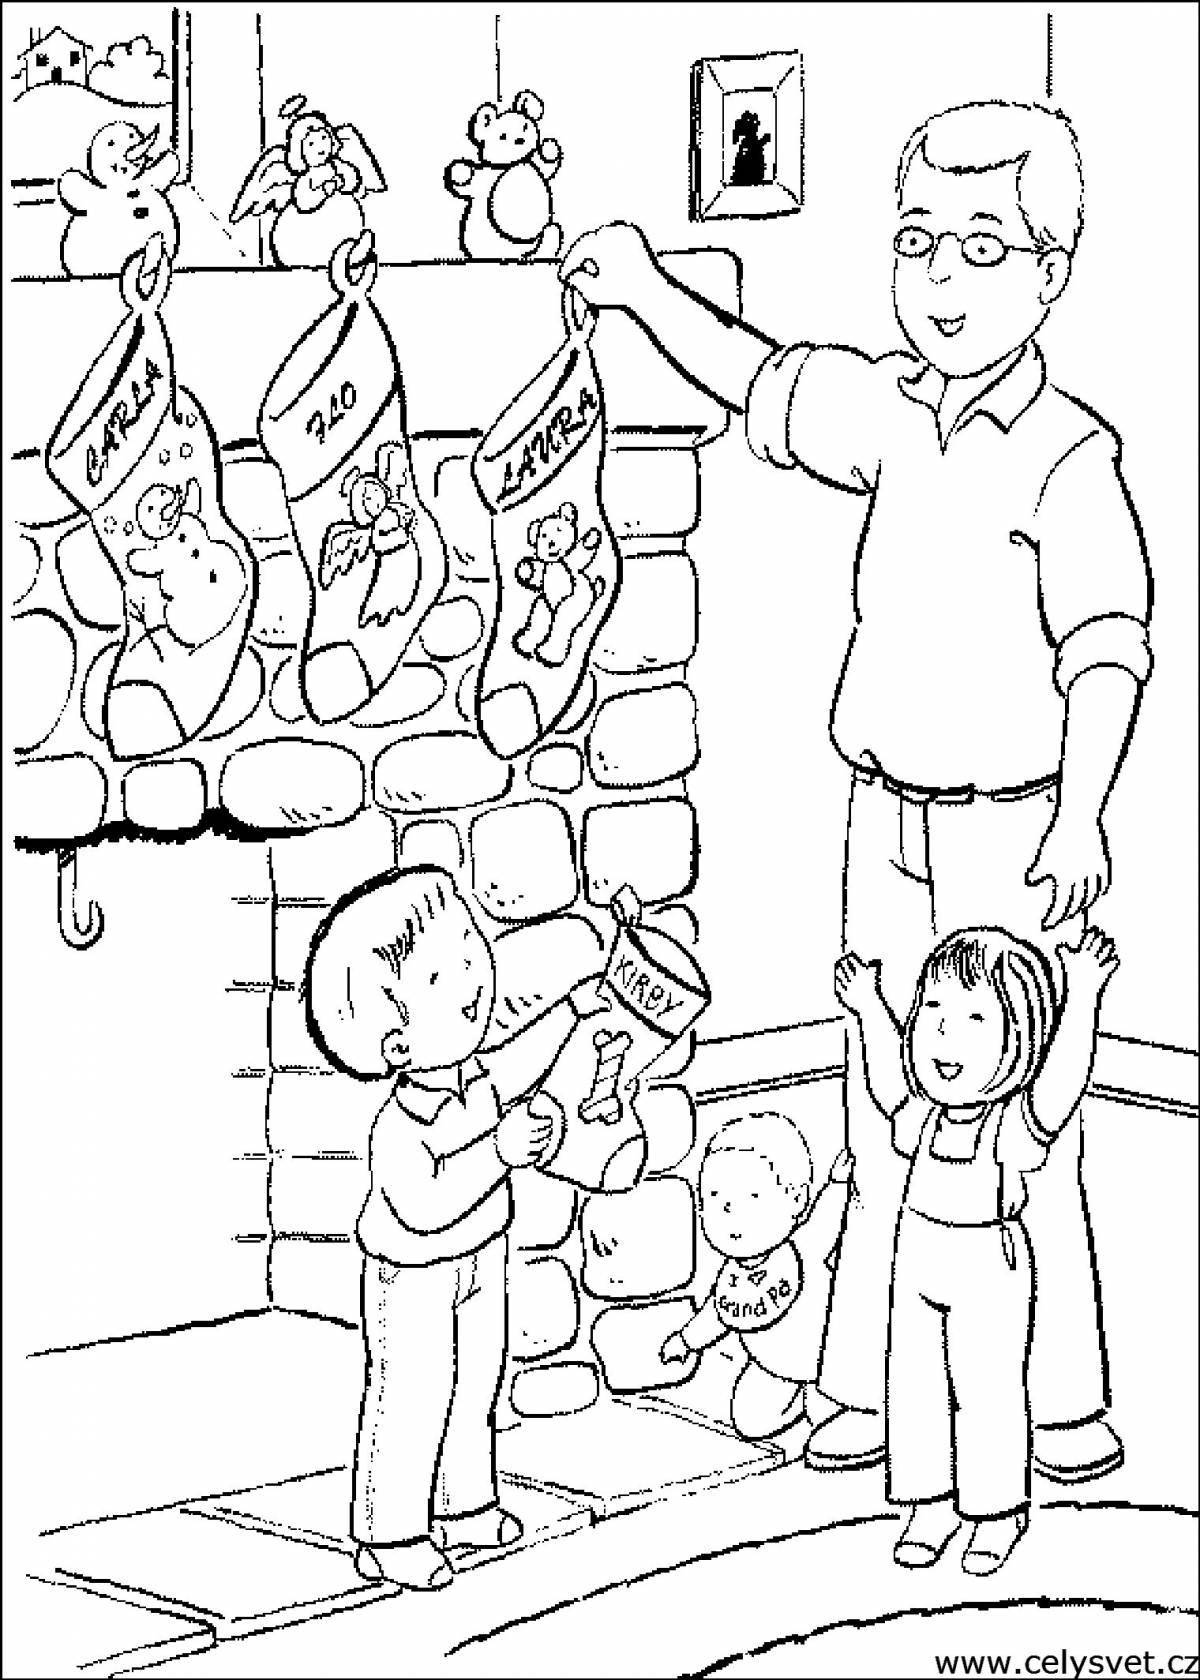 Exuberant Christmas family coloring book